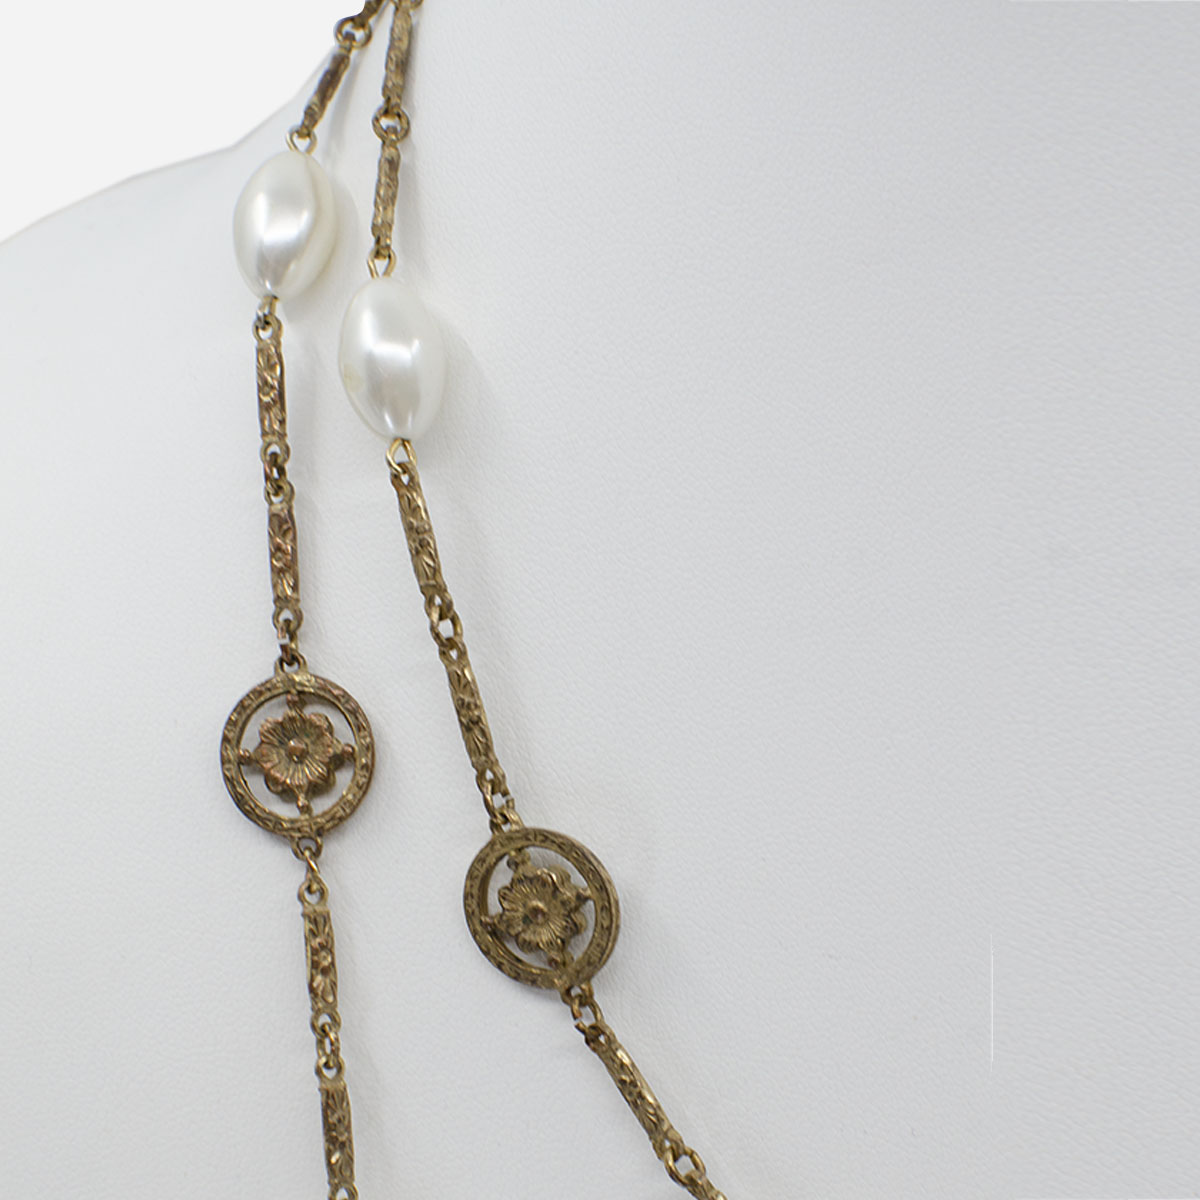 Edwardian gold and pearl necklace